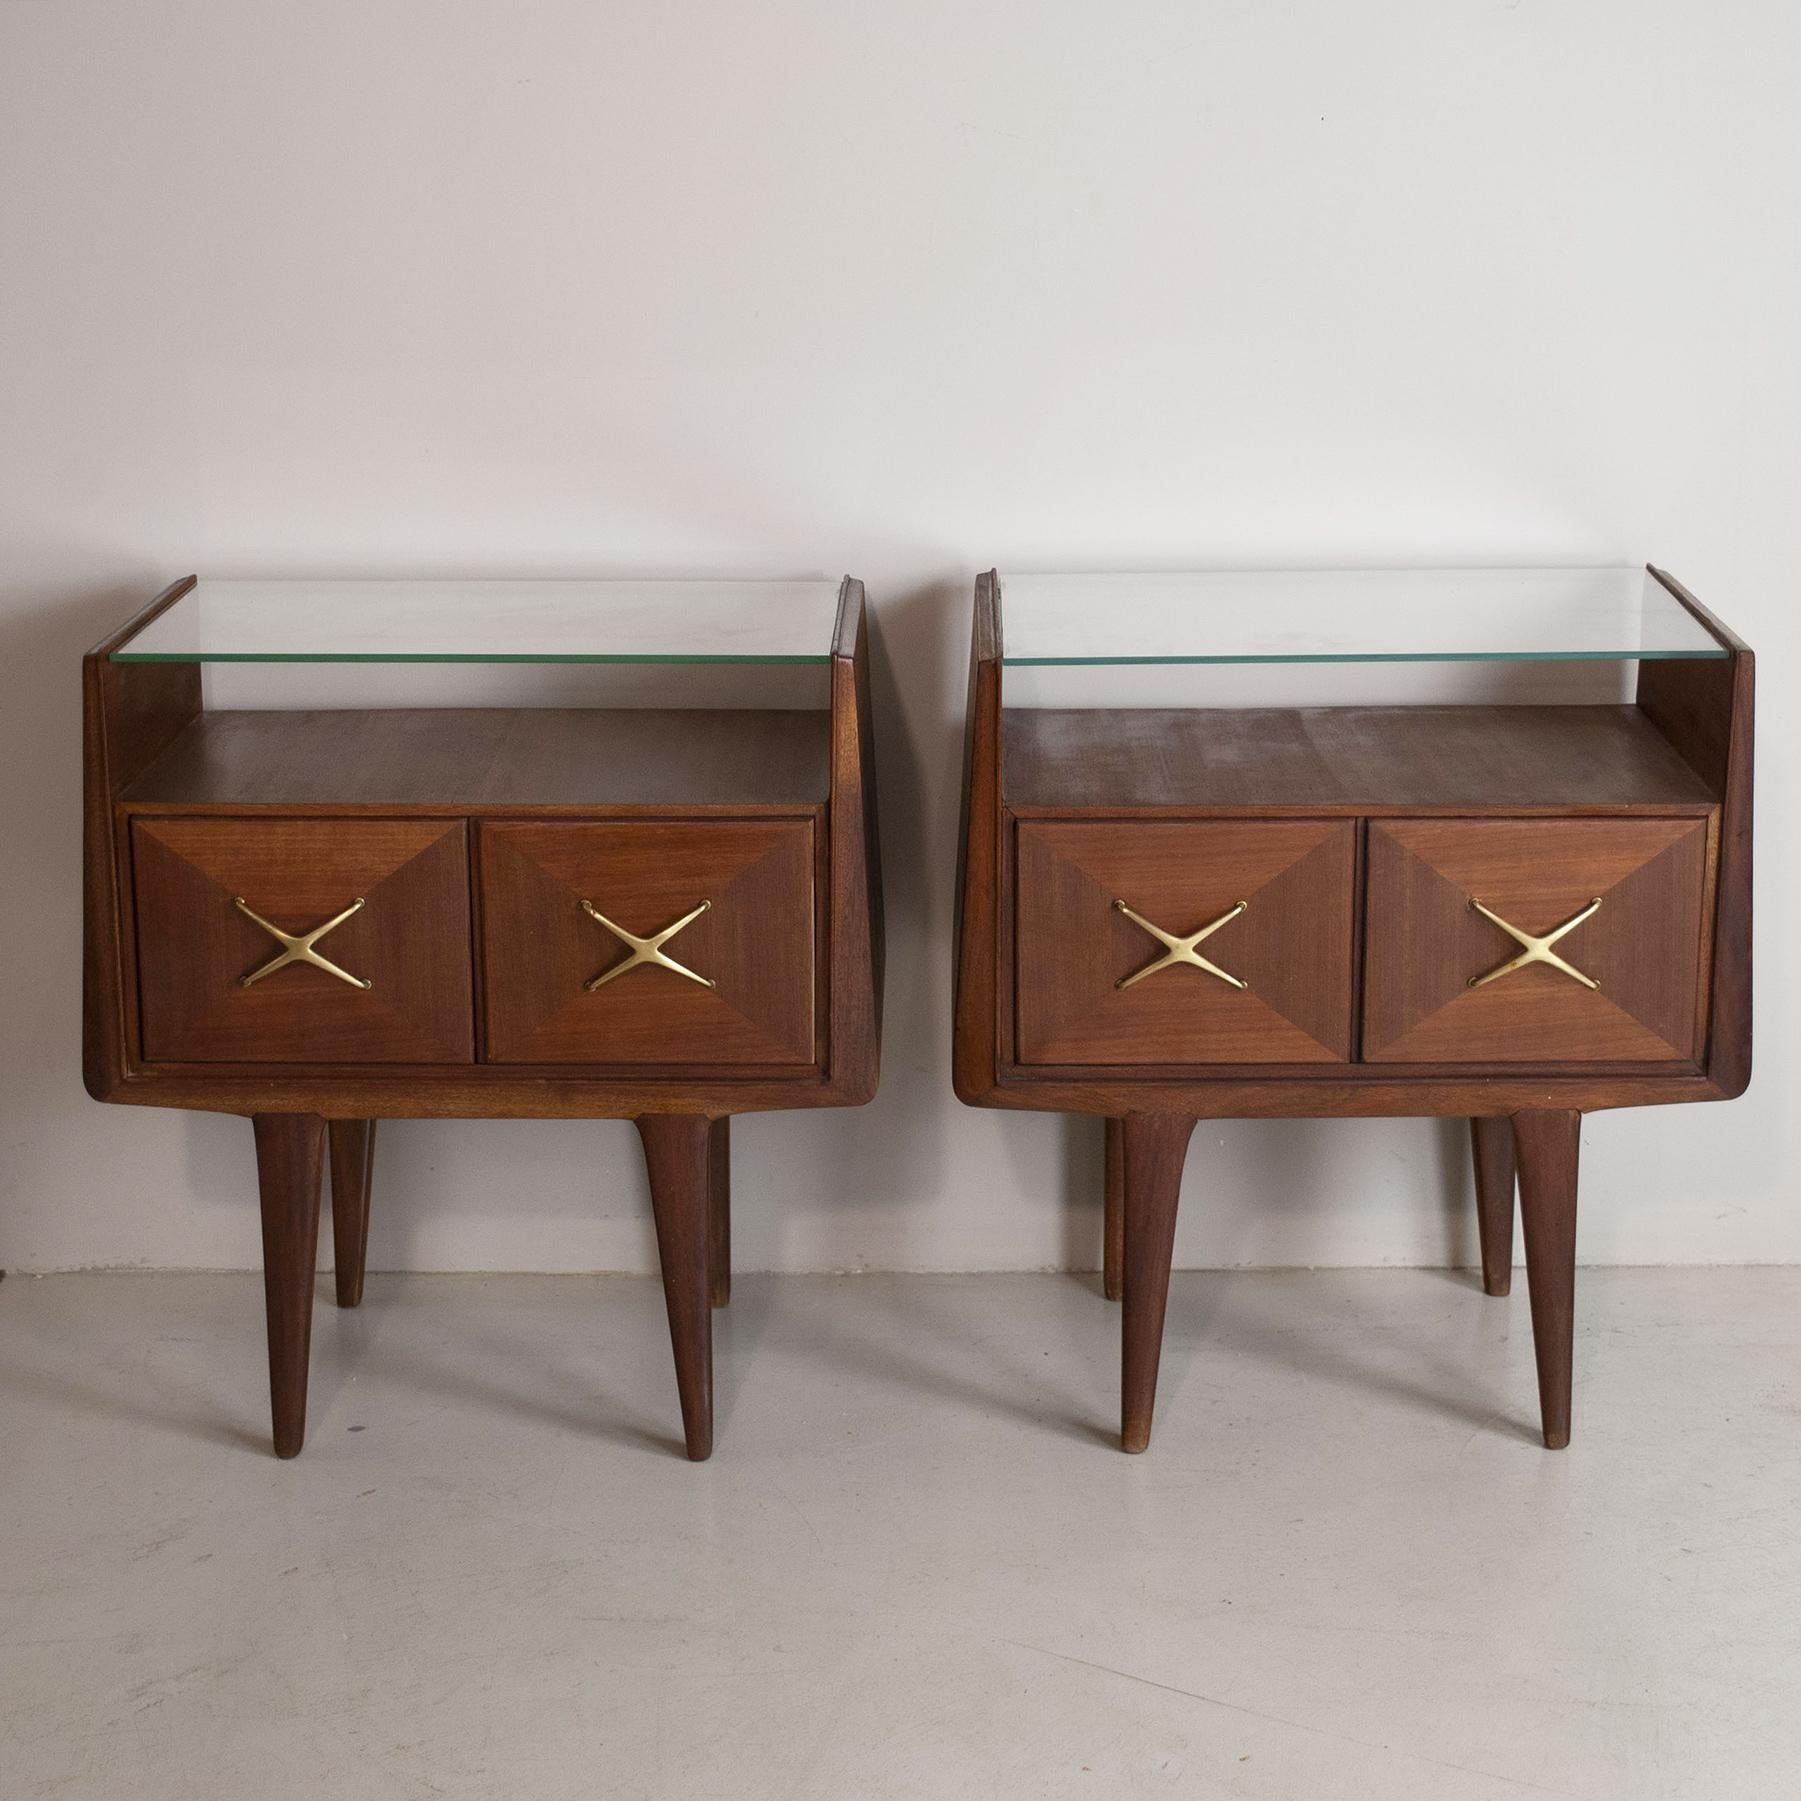 Mid-Century Modern Gio Ponti Nighstands in Wood from Early Fifties